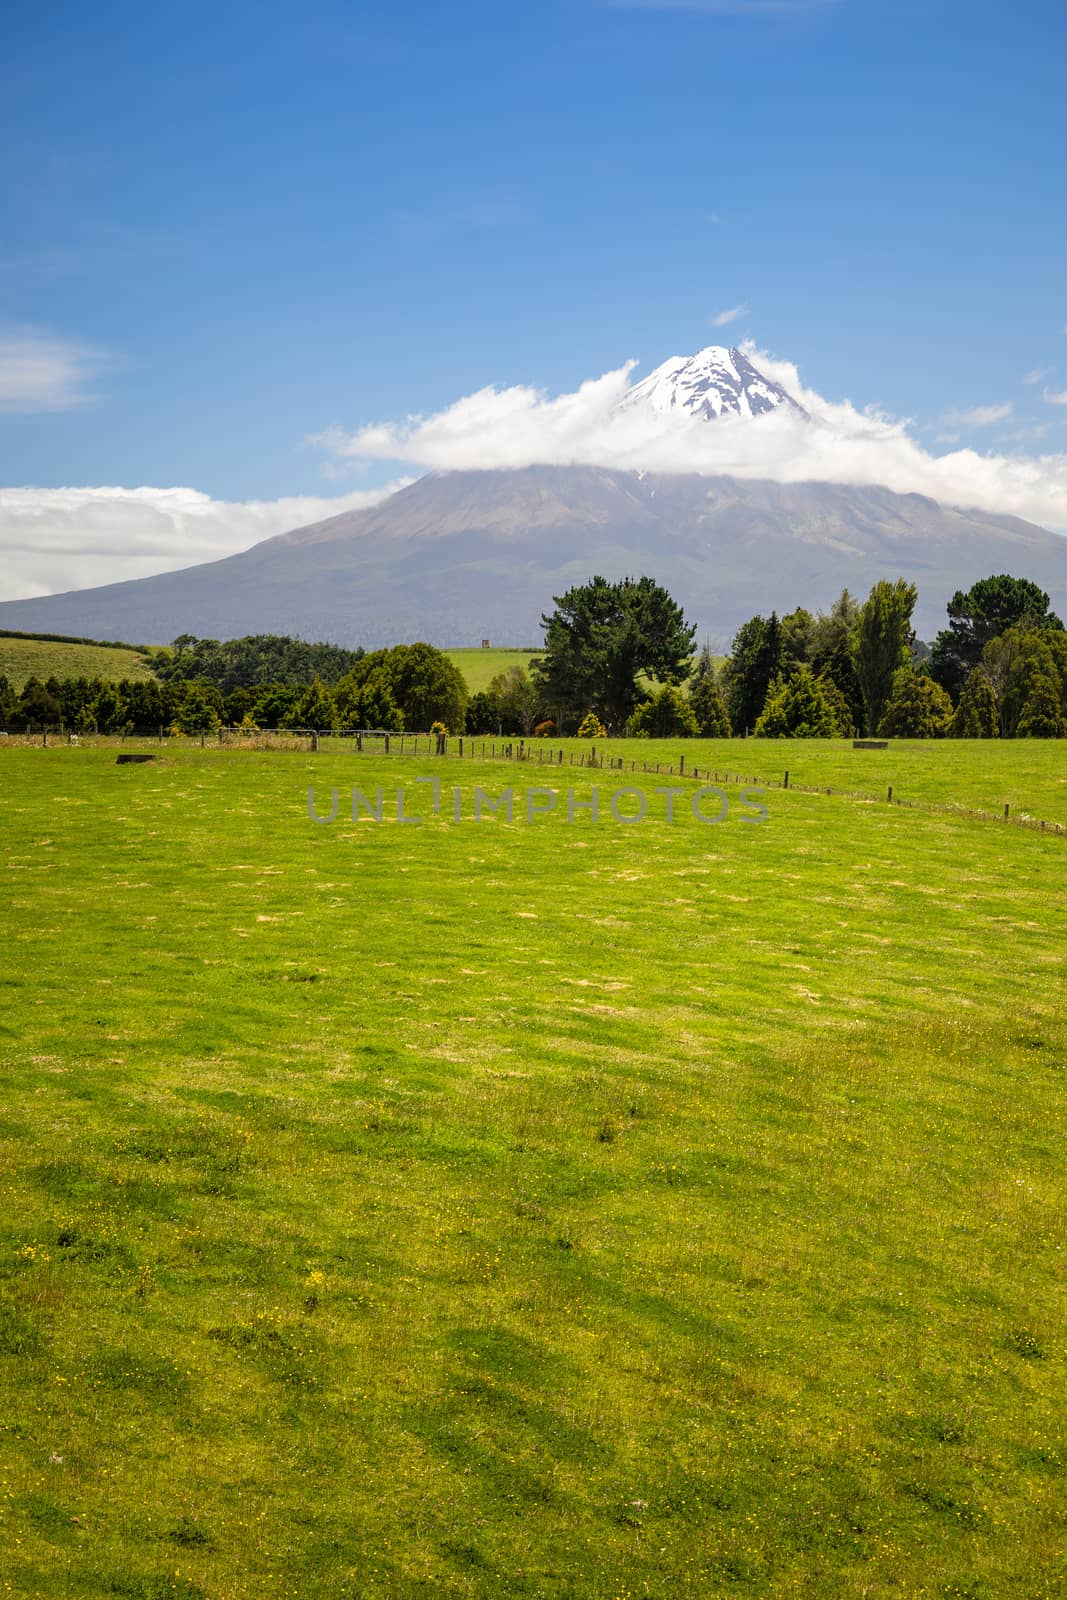 An image of the volcano Taranaki covered in clouds, New Zealand